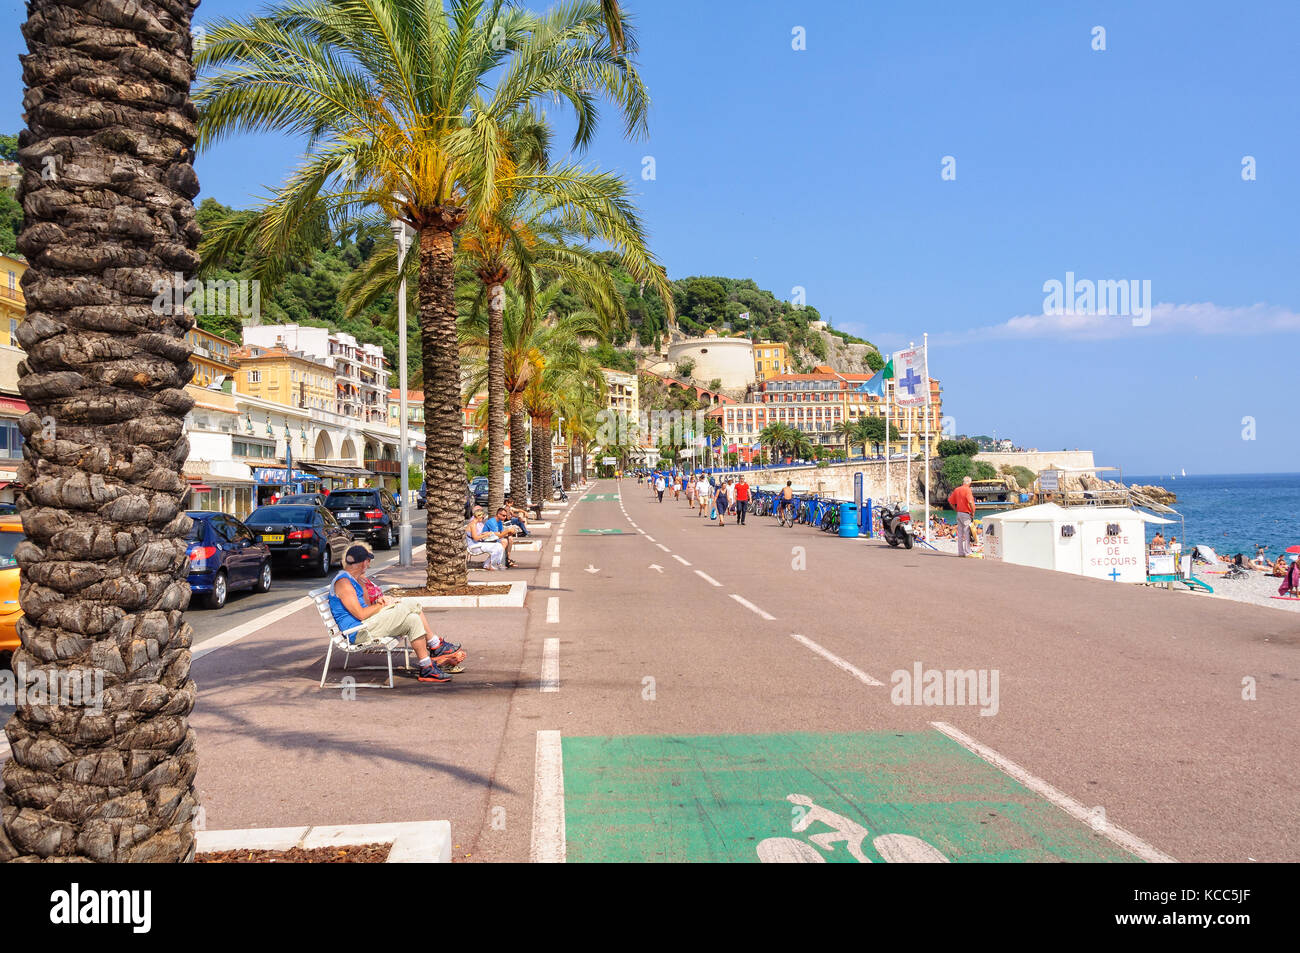 Palm trees, white benches and cycle paths on Quai des États-Unis - Nice, France Stock Photo